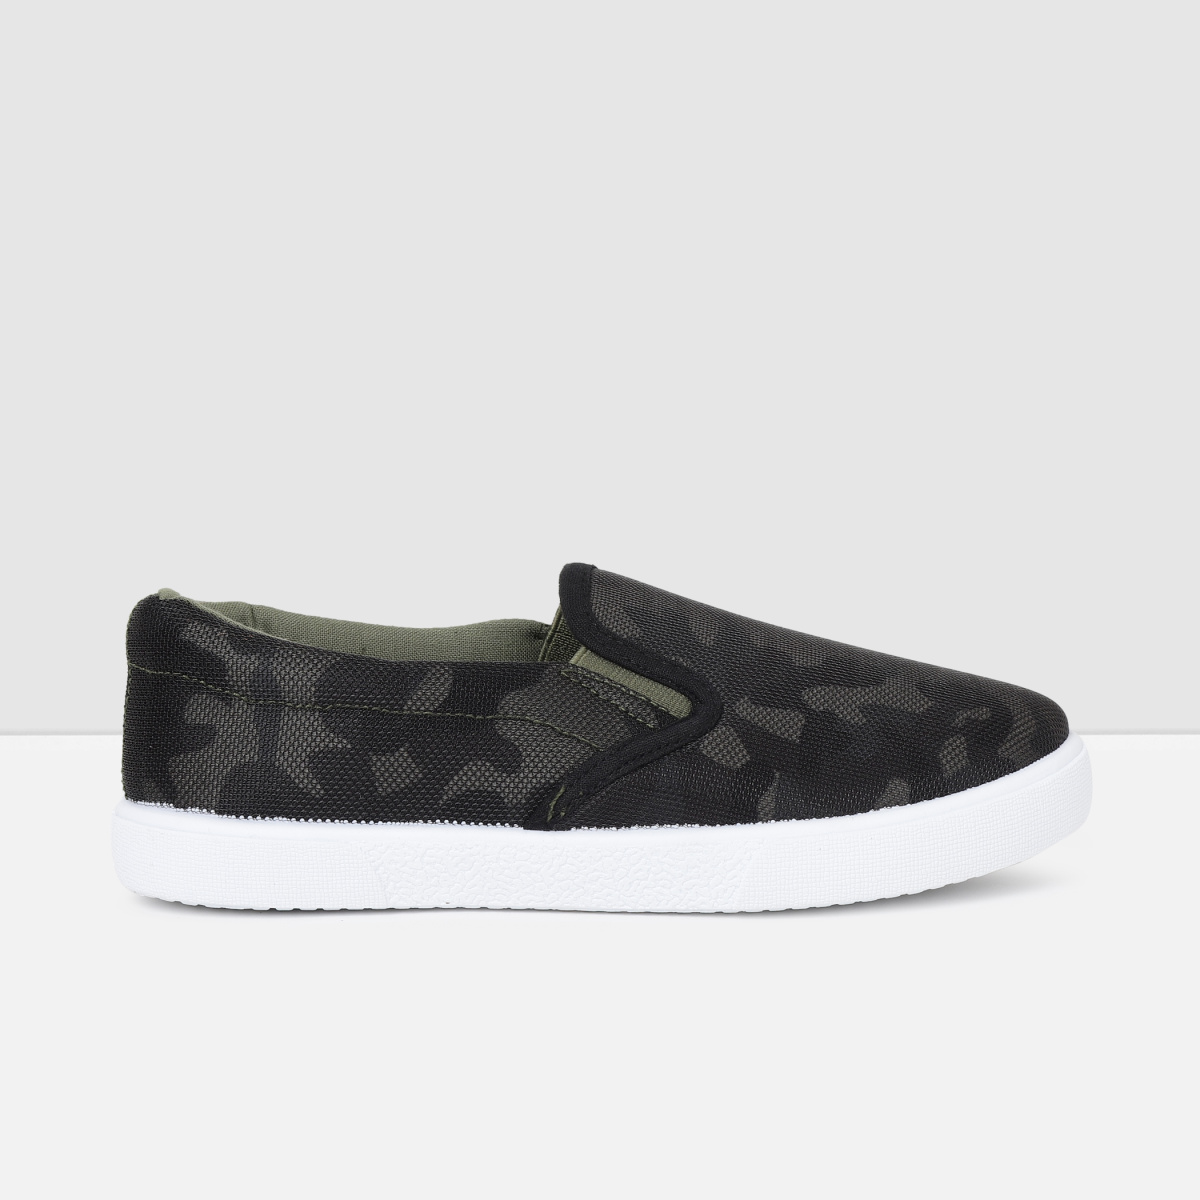 MAX Printed Slip-On Casual shoes